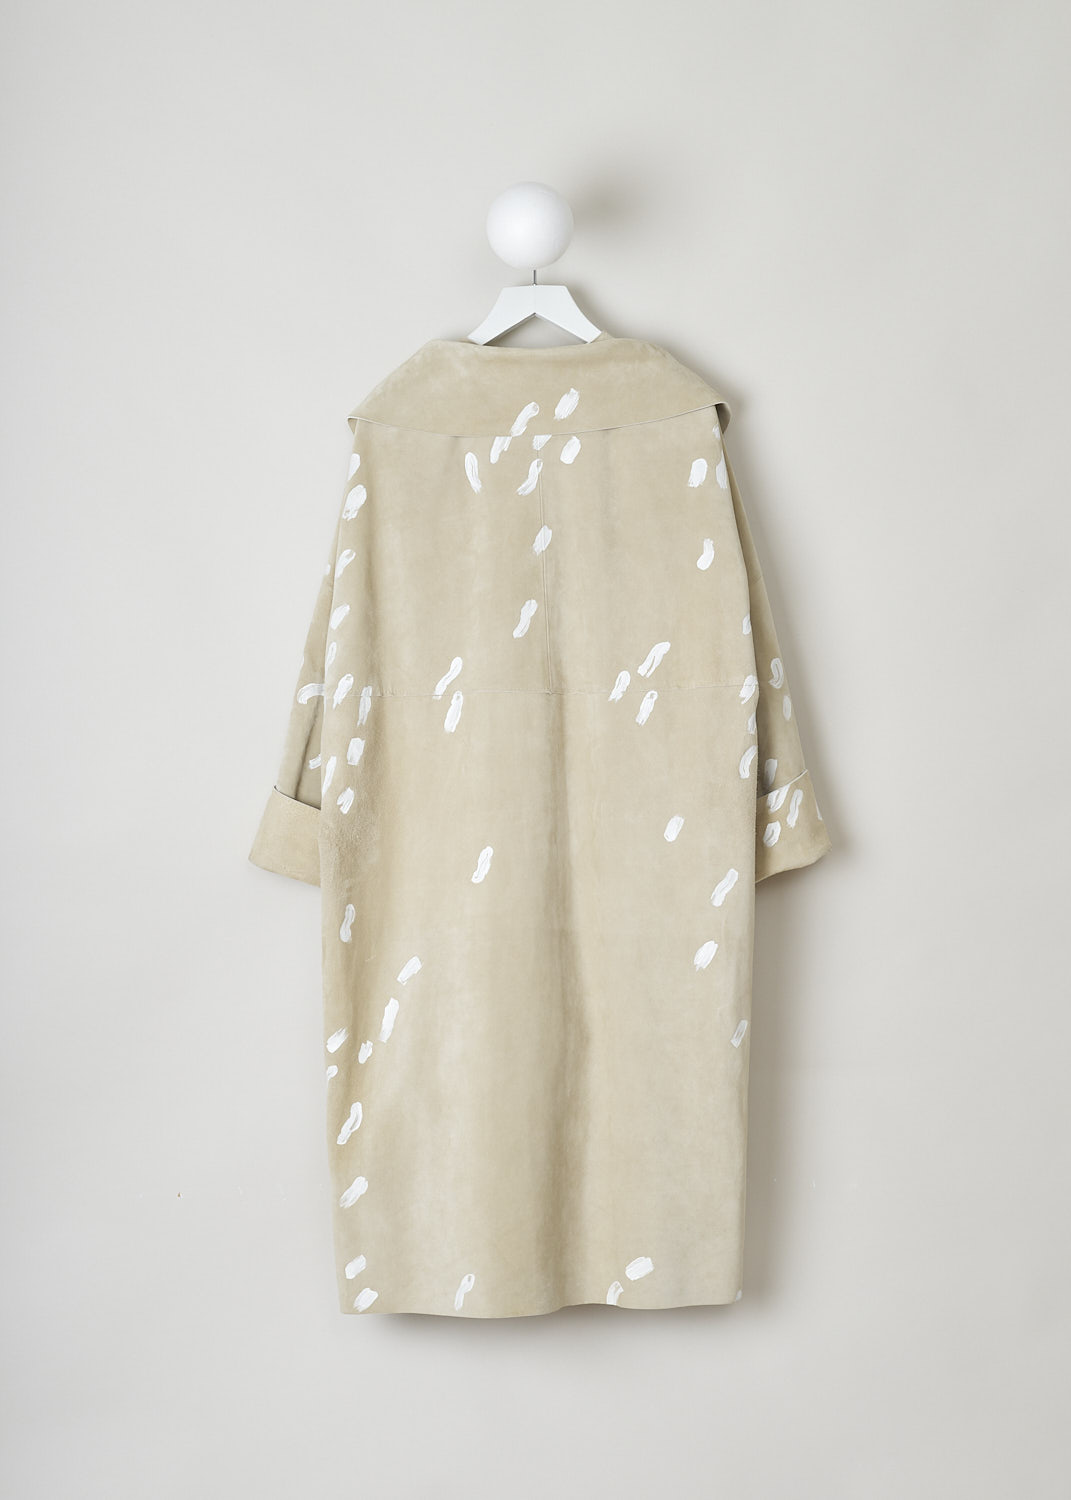 Marni, Beige duster coat with playful hand painted print, SPMX0027Y2_LV835_ROW13, Beige, Print, Back, This beige duster coat is playfully decorated with hand painted brush strokes. The coat has a cape collar that drapes over the shoulders. It comes with a single button closure. In the front two slash pockets can be found. The 3/4 sleeves have folded over cuffs.